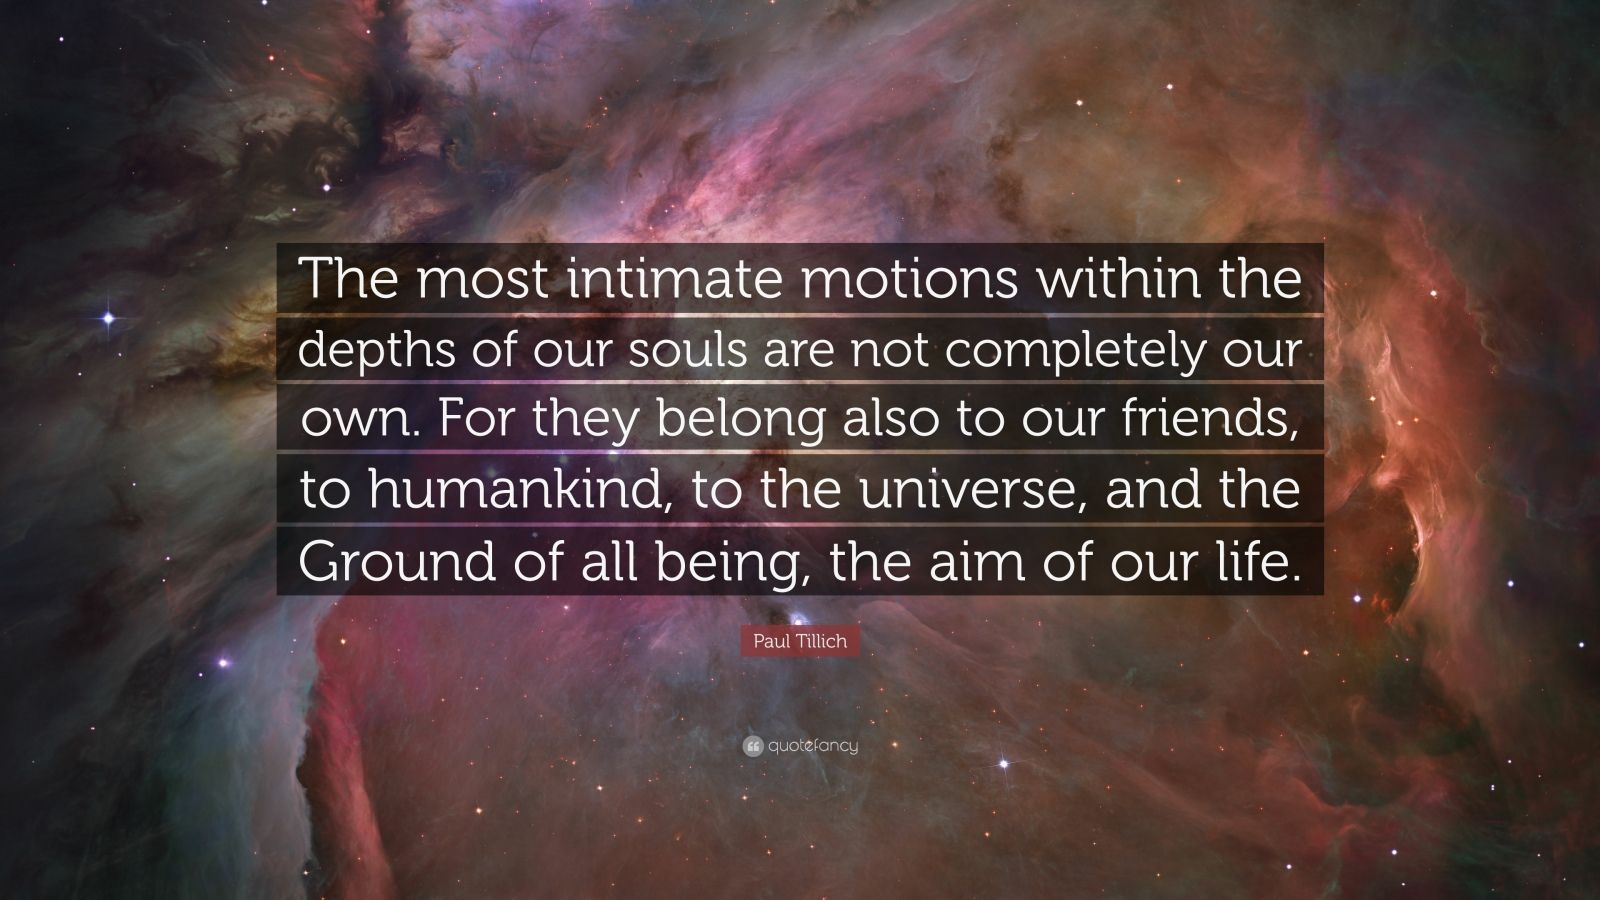 Paul Tillich Quote: “The most intimate motions within the depths of our